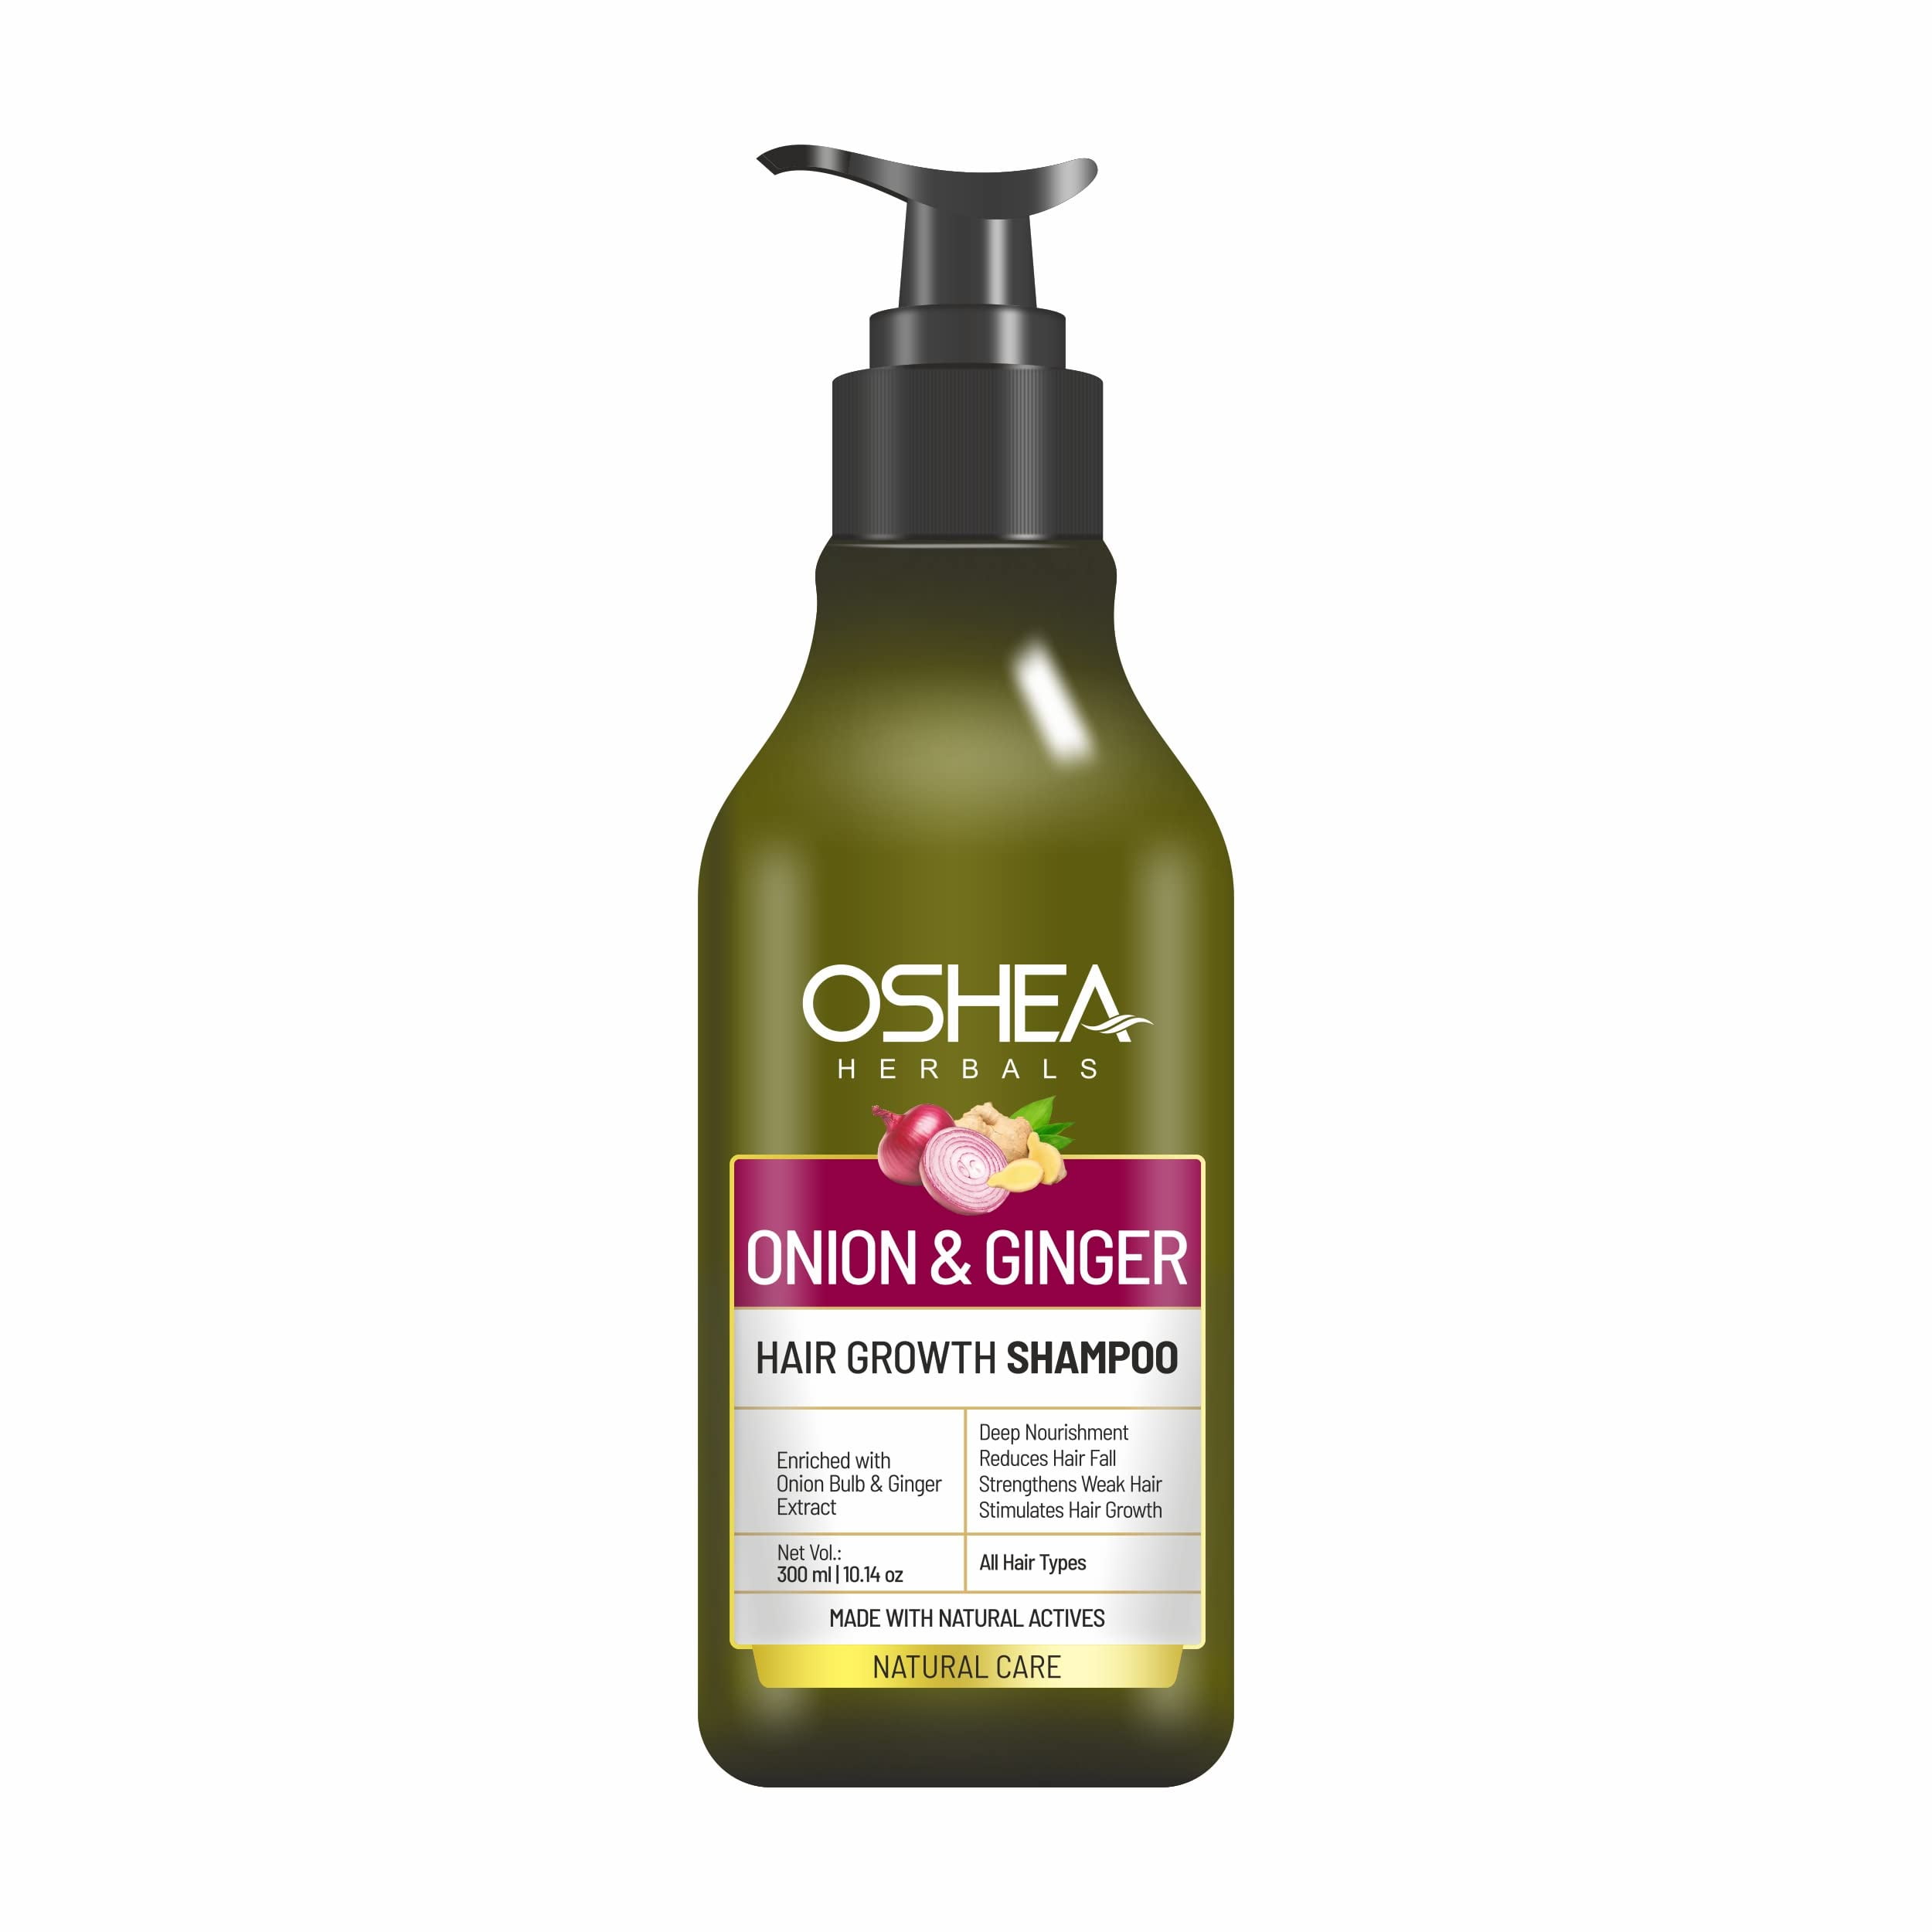 Oshea Herbals Onion & Ginger Hair Growth Shampoo I Enriched With Onion  Bulb, Ginger Extract I 300Ml 